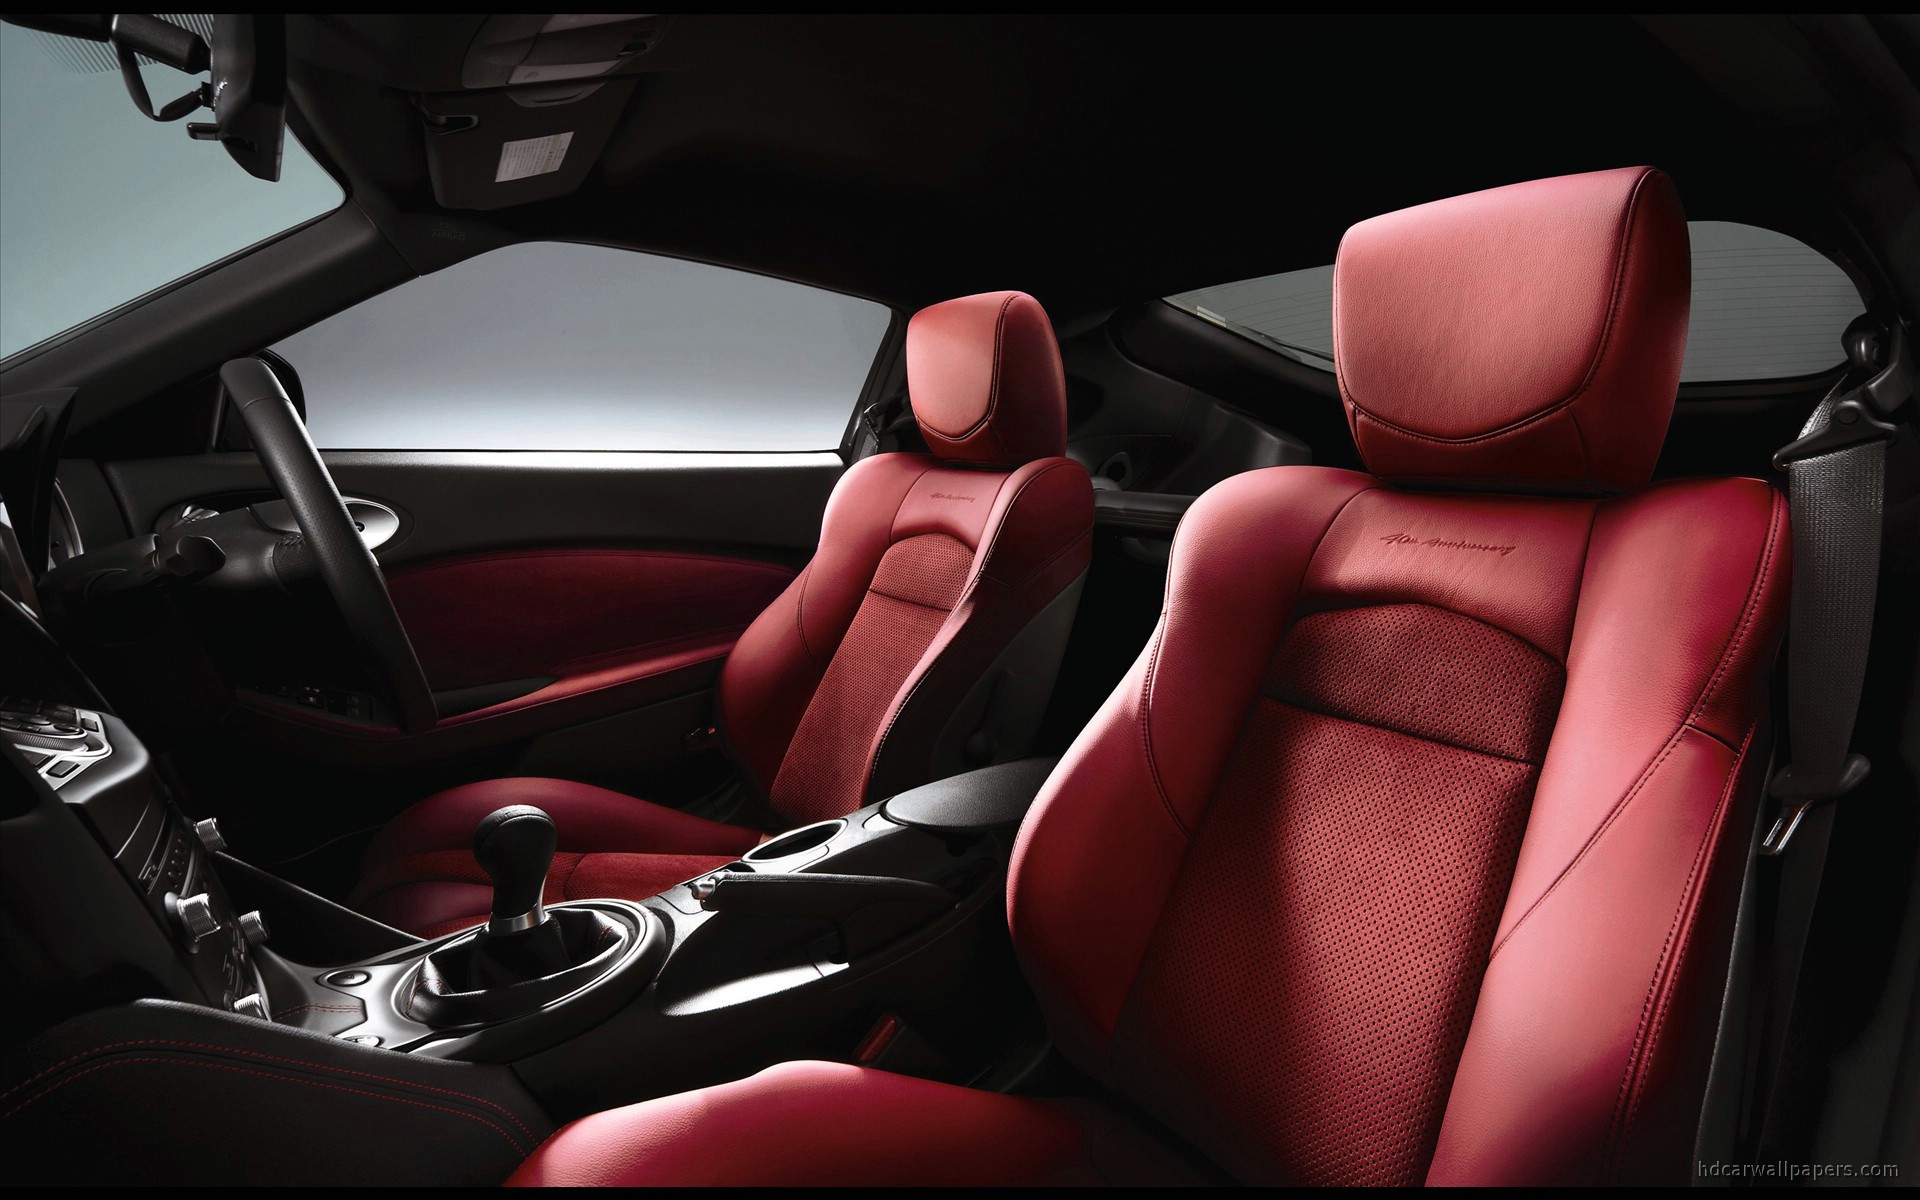 nissan_new_limited_edition_370z_40th_anniversary_model_interior-wide.jpg